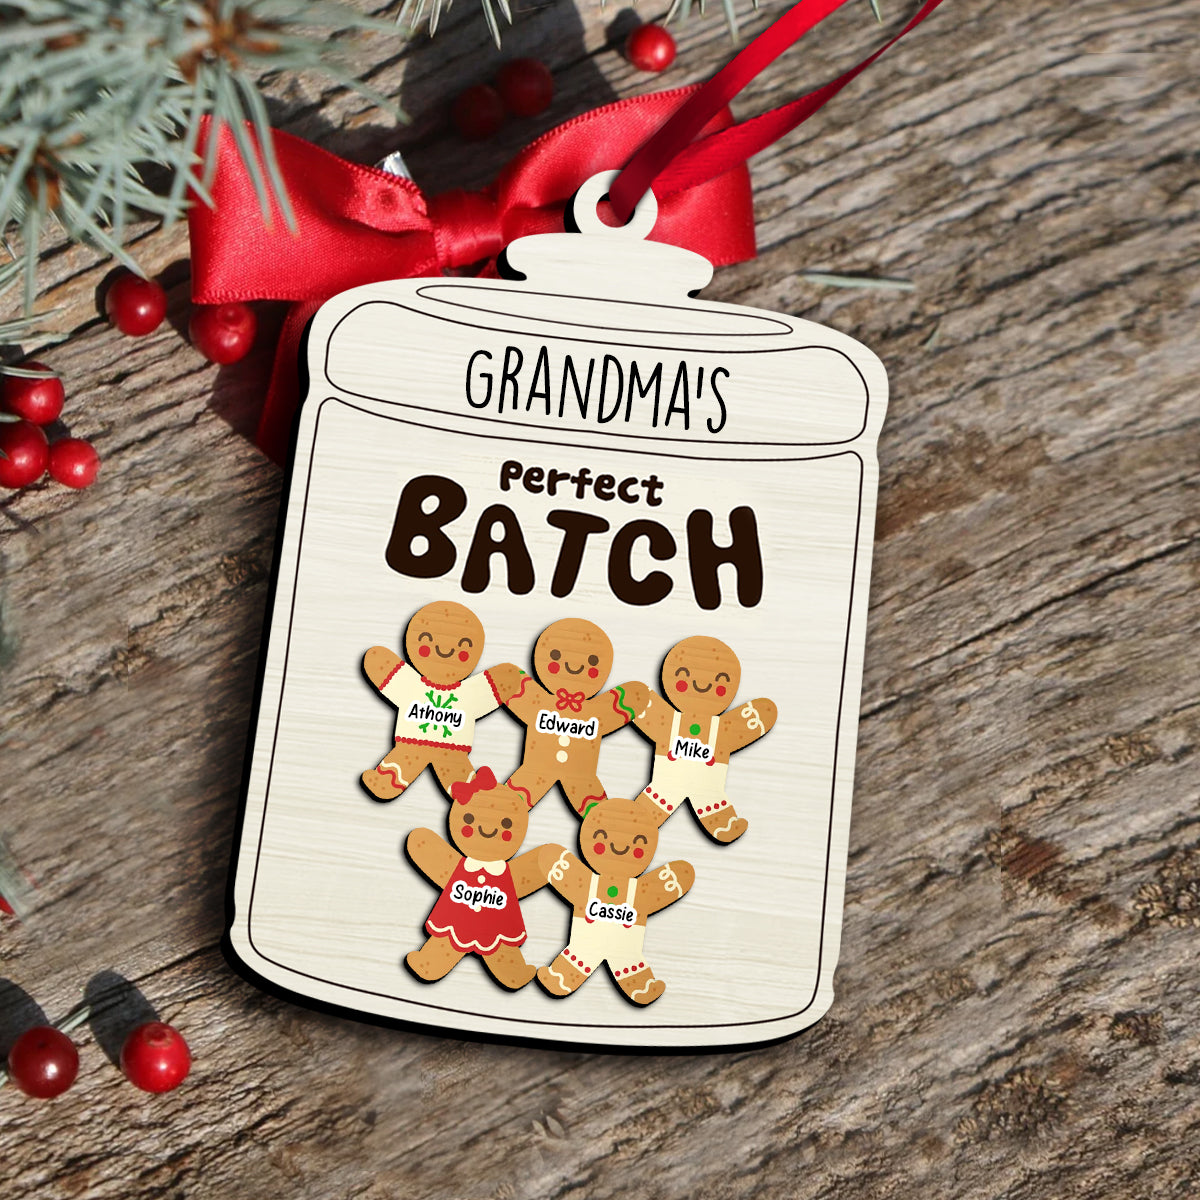 Grandma's Perfect Batch - Personalized Layered Wooden Ornament - Christmas Gift For Grandma